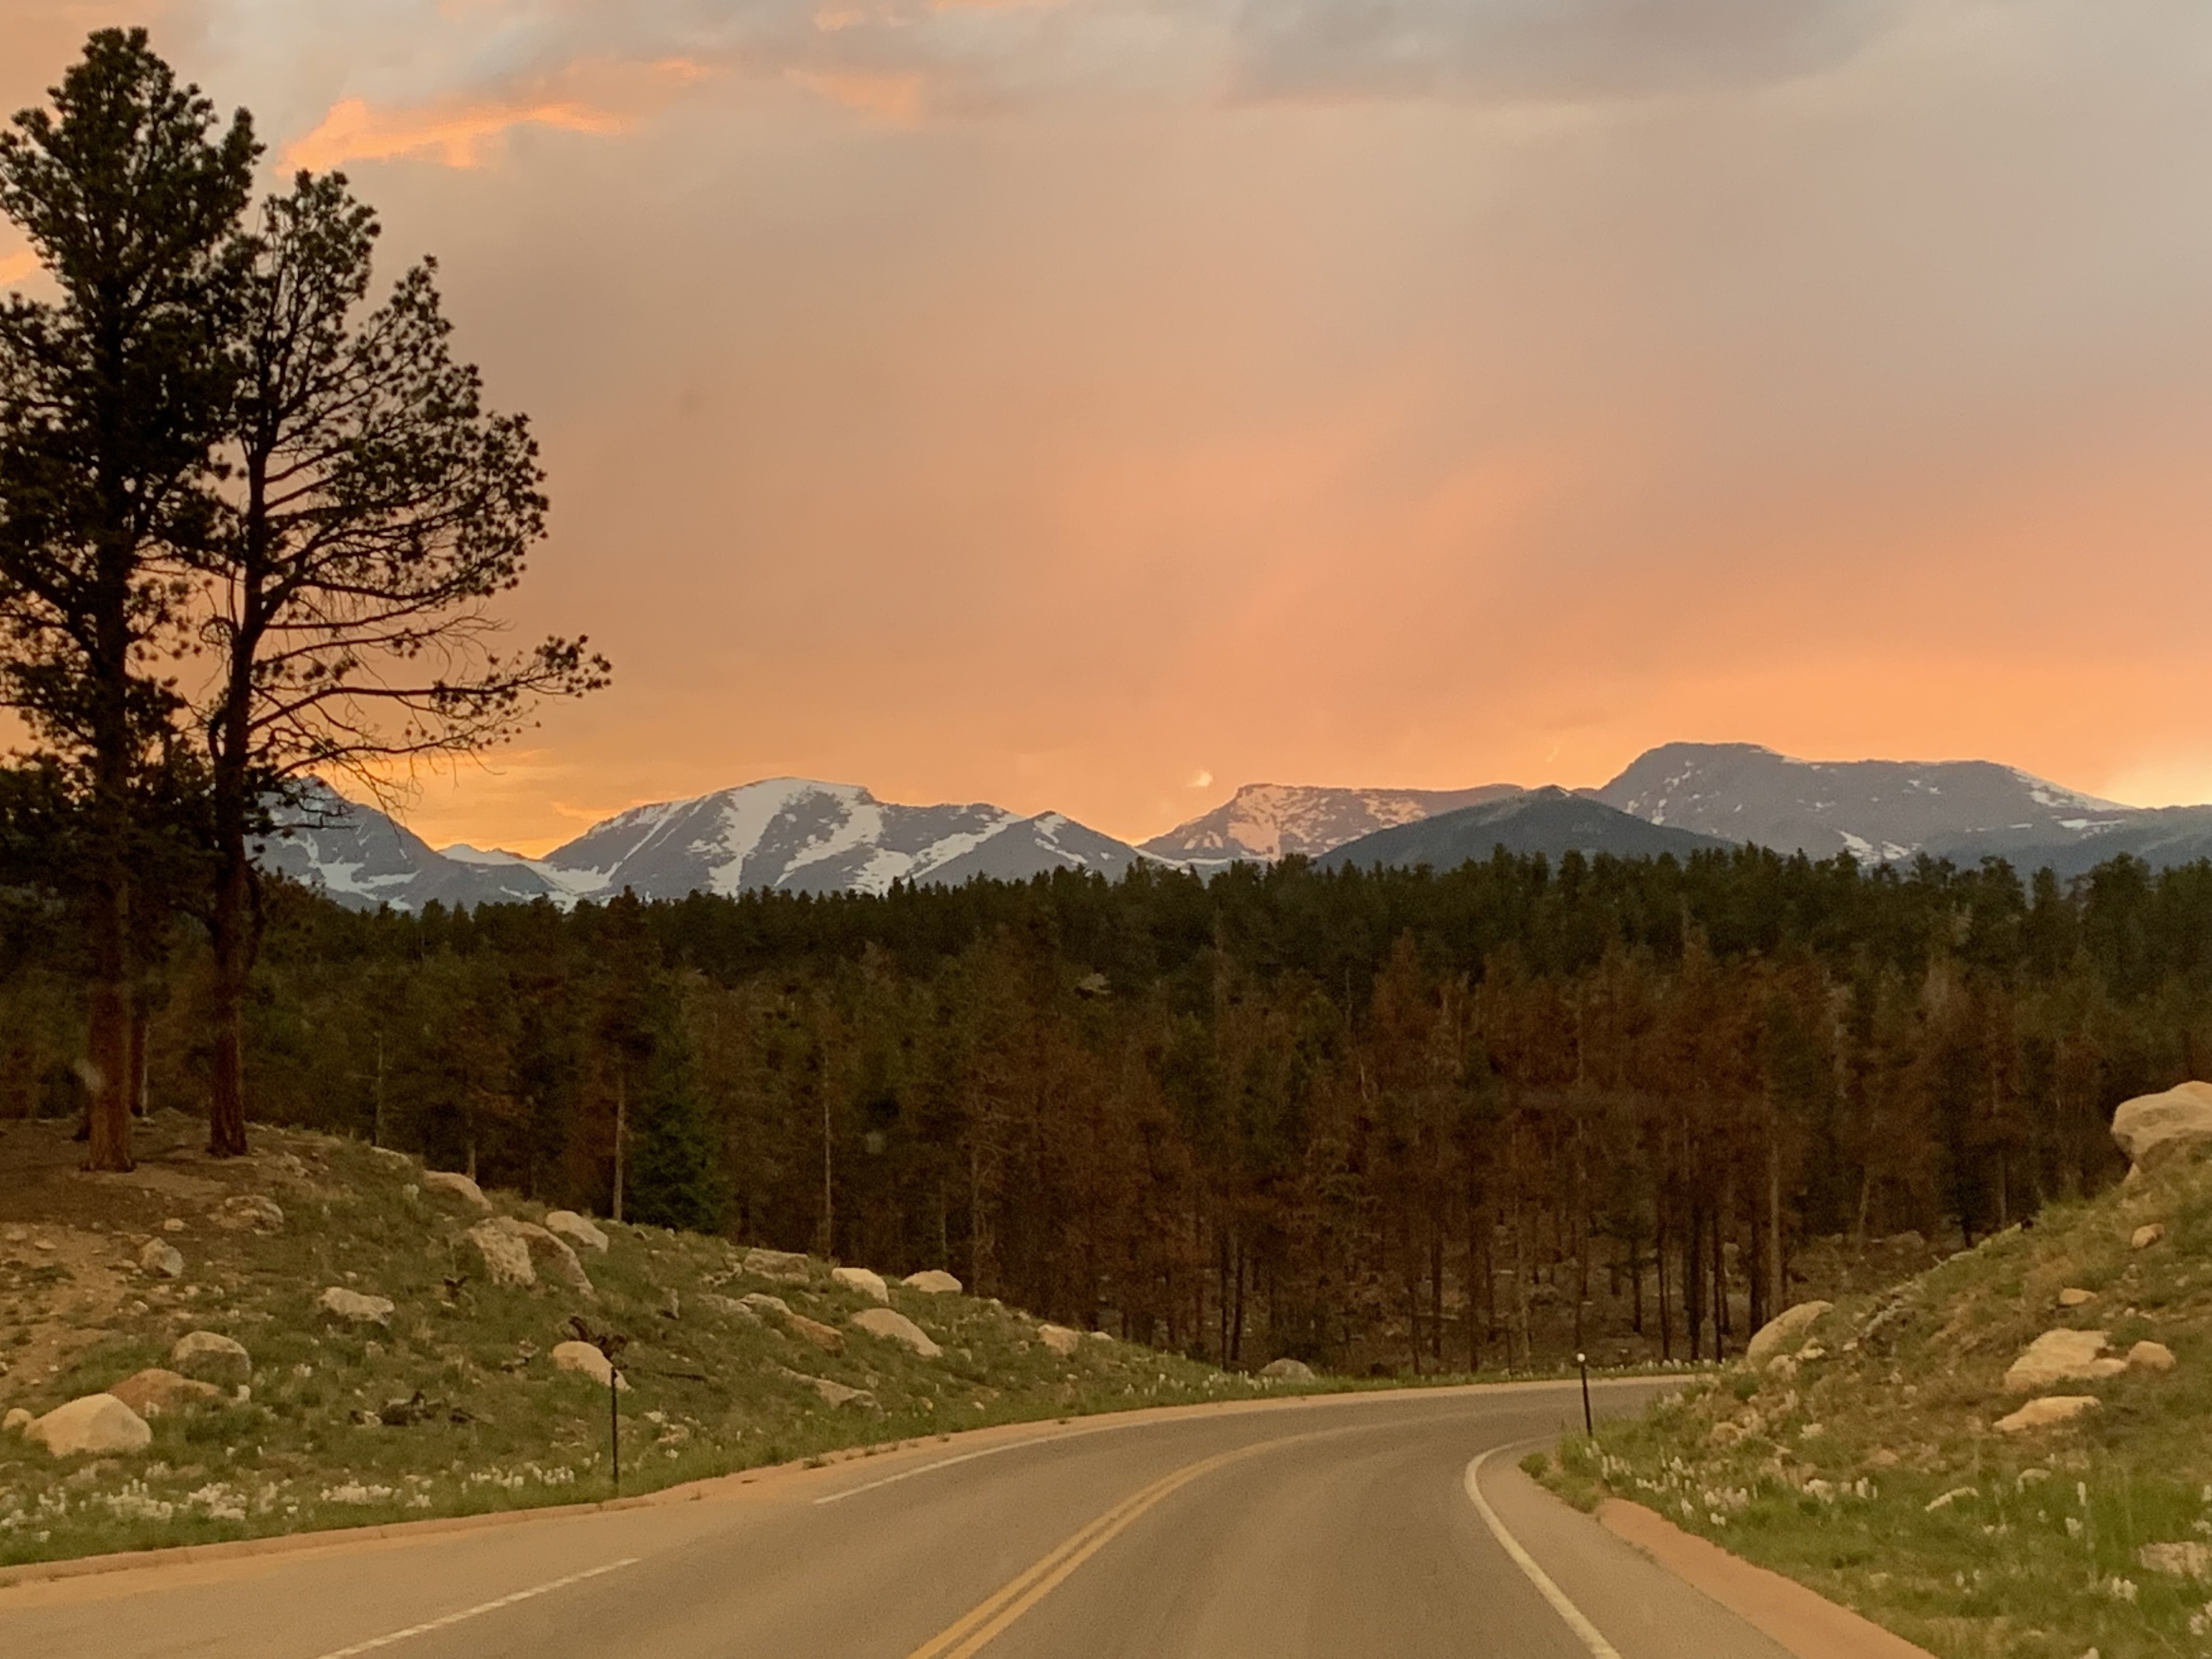 Sunset over the mountains in Rocky Mountain National Park